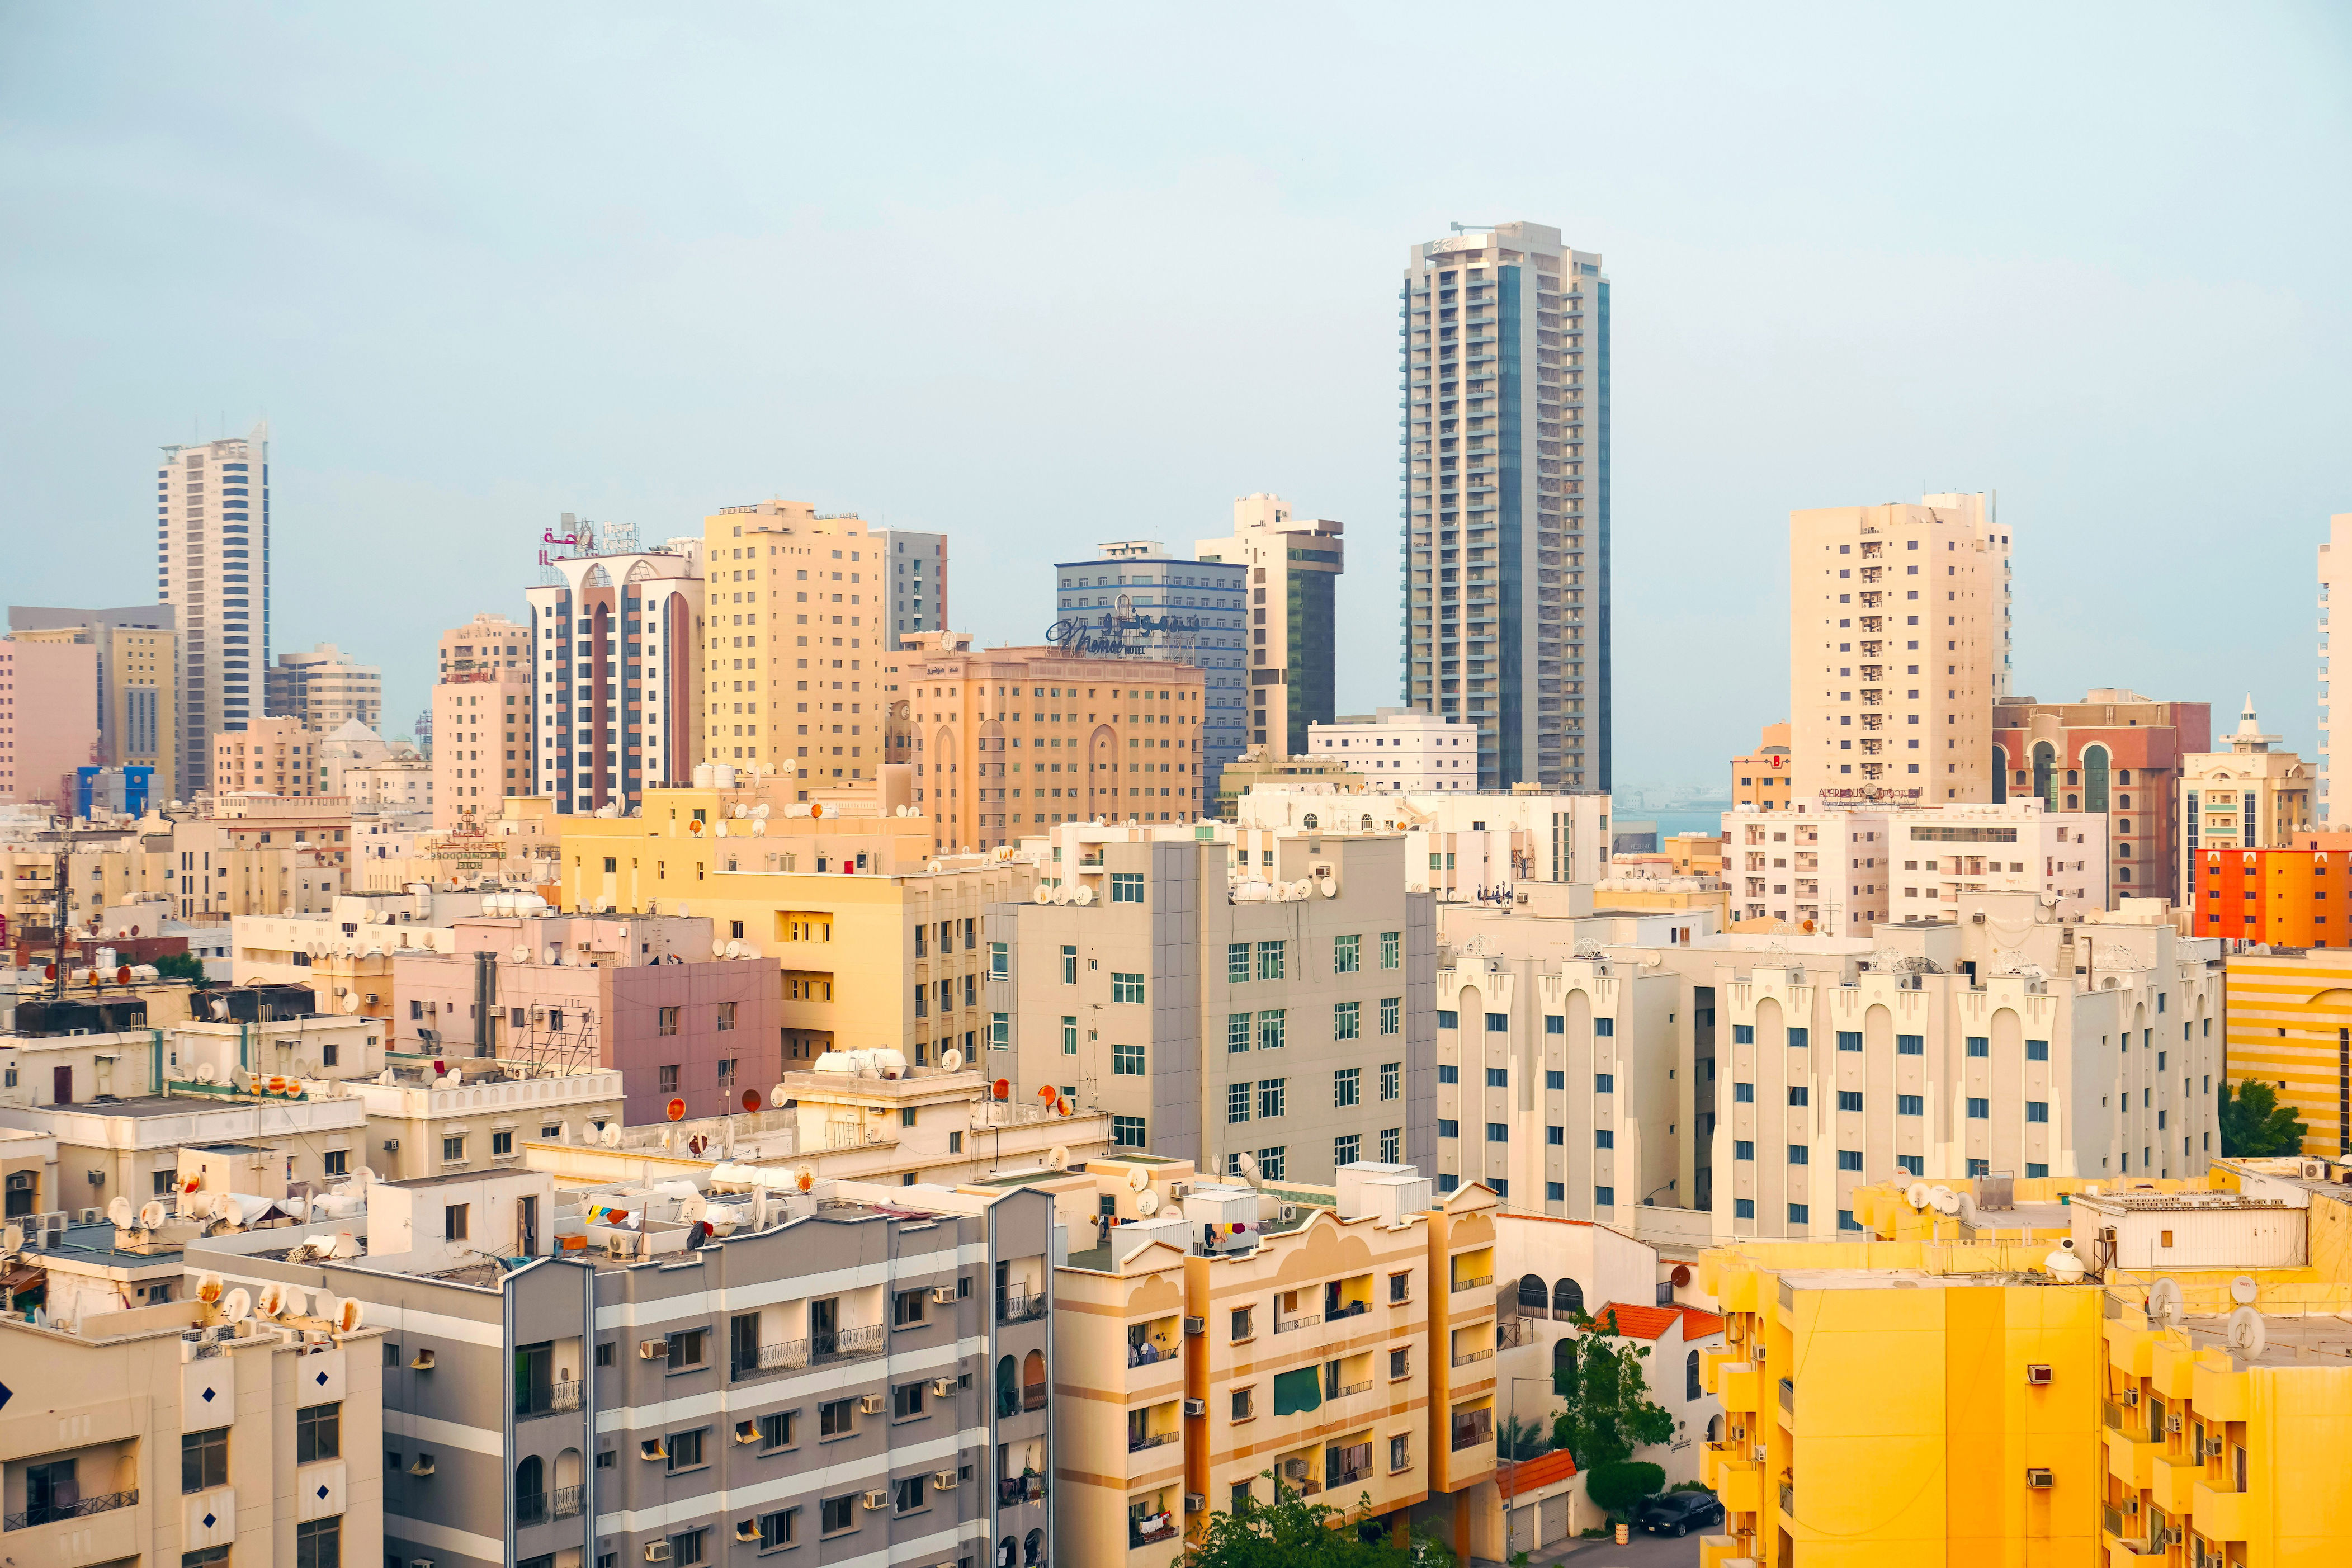 Perhaps this small island nation in the Arabian Gulf isn’t the first place that comes to mind when you think of packing up the house for new beginnings, but <a href="https://www.cntraveler.com/story/bahrain-ammar-basheir-locals-guide?mbid=synd_msn_rss&utm_source=msn&utm_medium=syndication">Bahrain</a> showed up strong in the rankings this year. It jumped 19 places in the main list this year, and it ranked first in the “Expats Essentials” index, which quantifies how easy it is to acclimate to life in other countries—opening a bank account, obtaining a visa, overcoming language barriers, and the like.<p>Sign up to receive the latest news, expert tips, and inspiration on all things travel</p><a href="https://www.cntraveler.com/newsletter/the-daily?sourceCode=msnsend">Inspire Me</a>